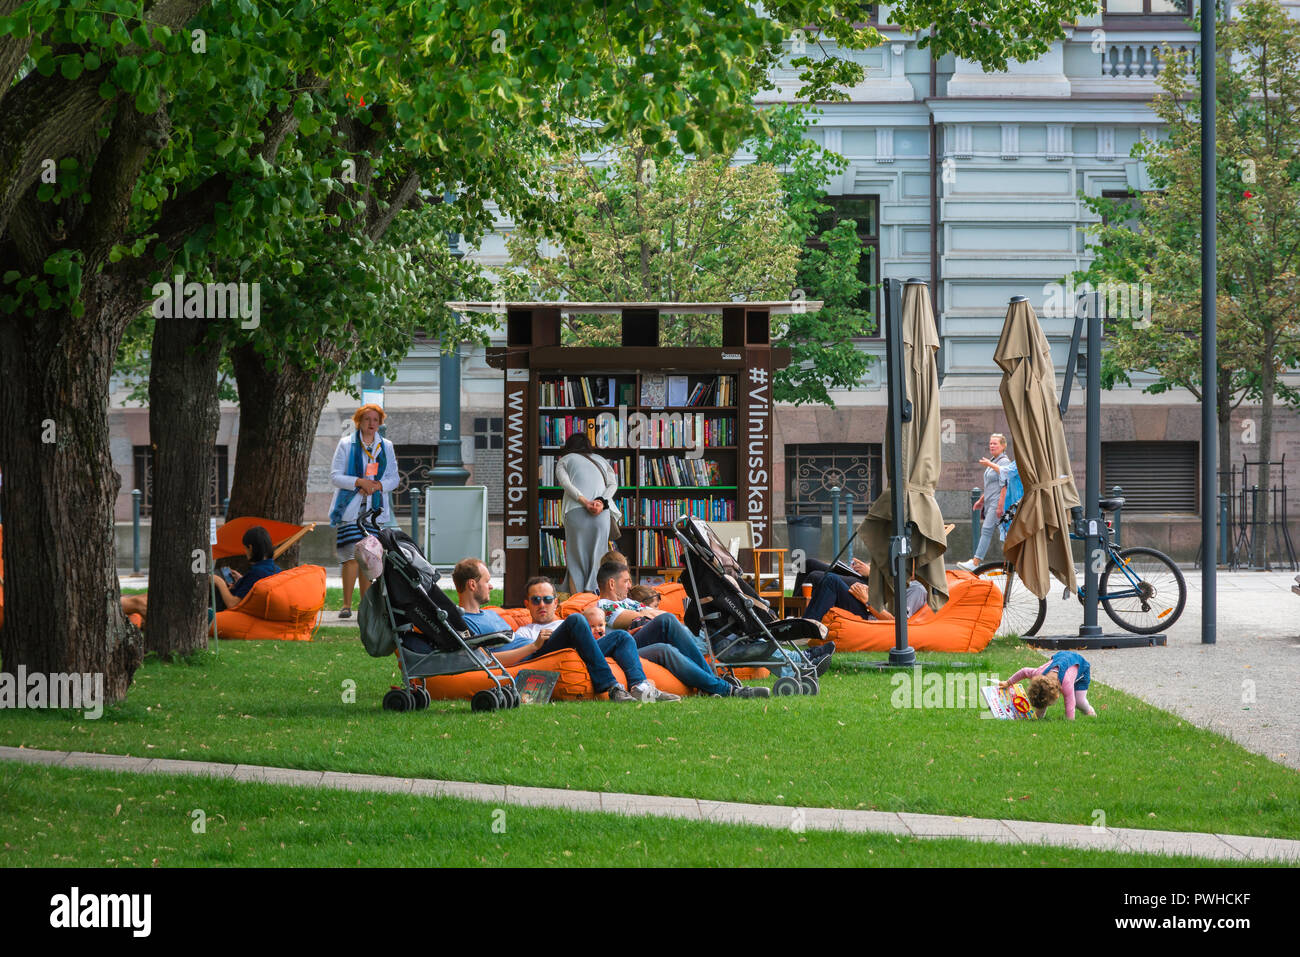 Lithuania people park, view of a family group relaxing near a courtesy bookstand in a corner of Lukiskiu aikste city park in the Vilnius New Town area. Stock Photo